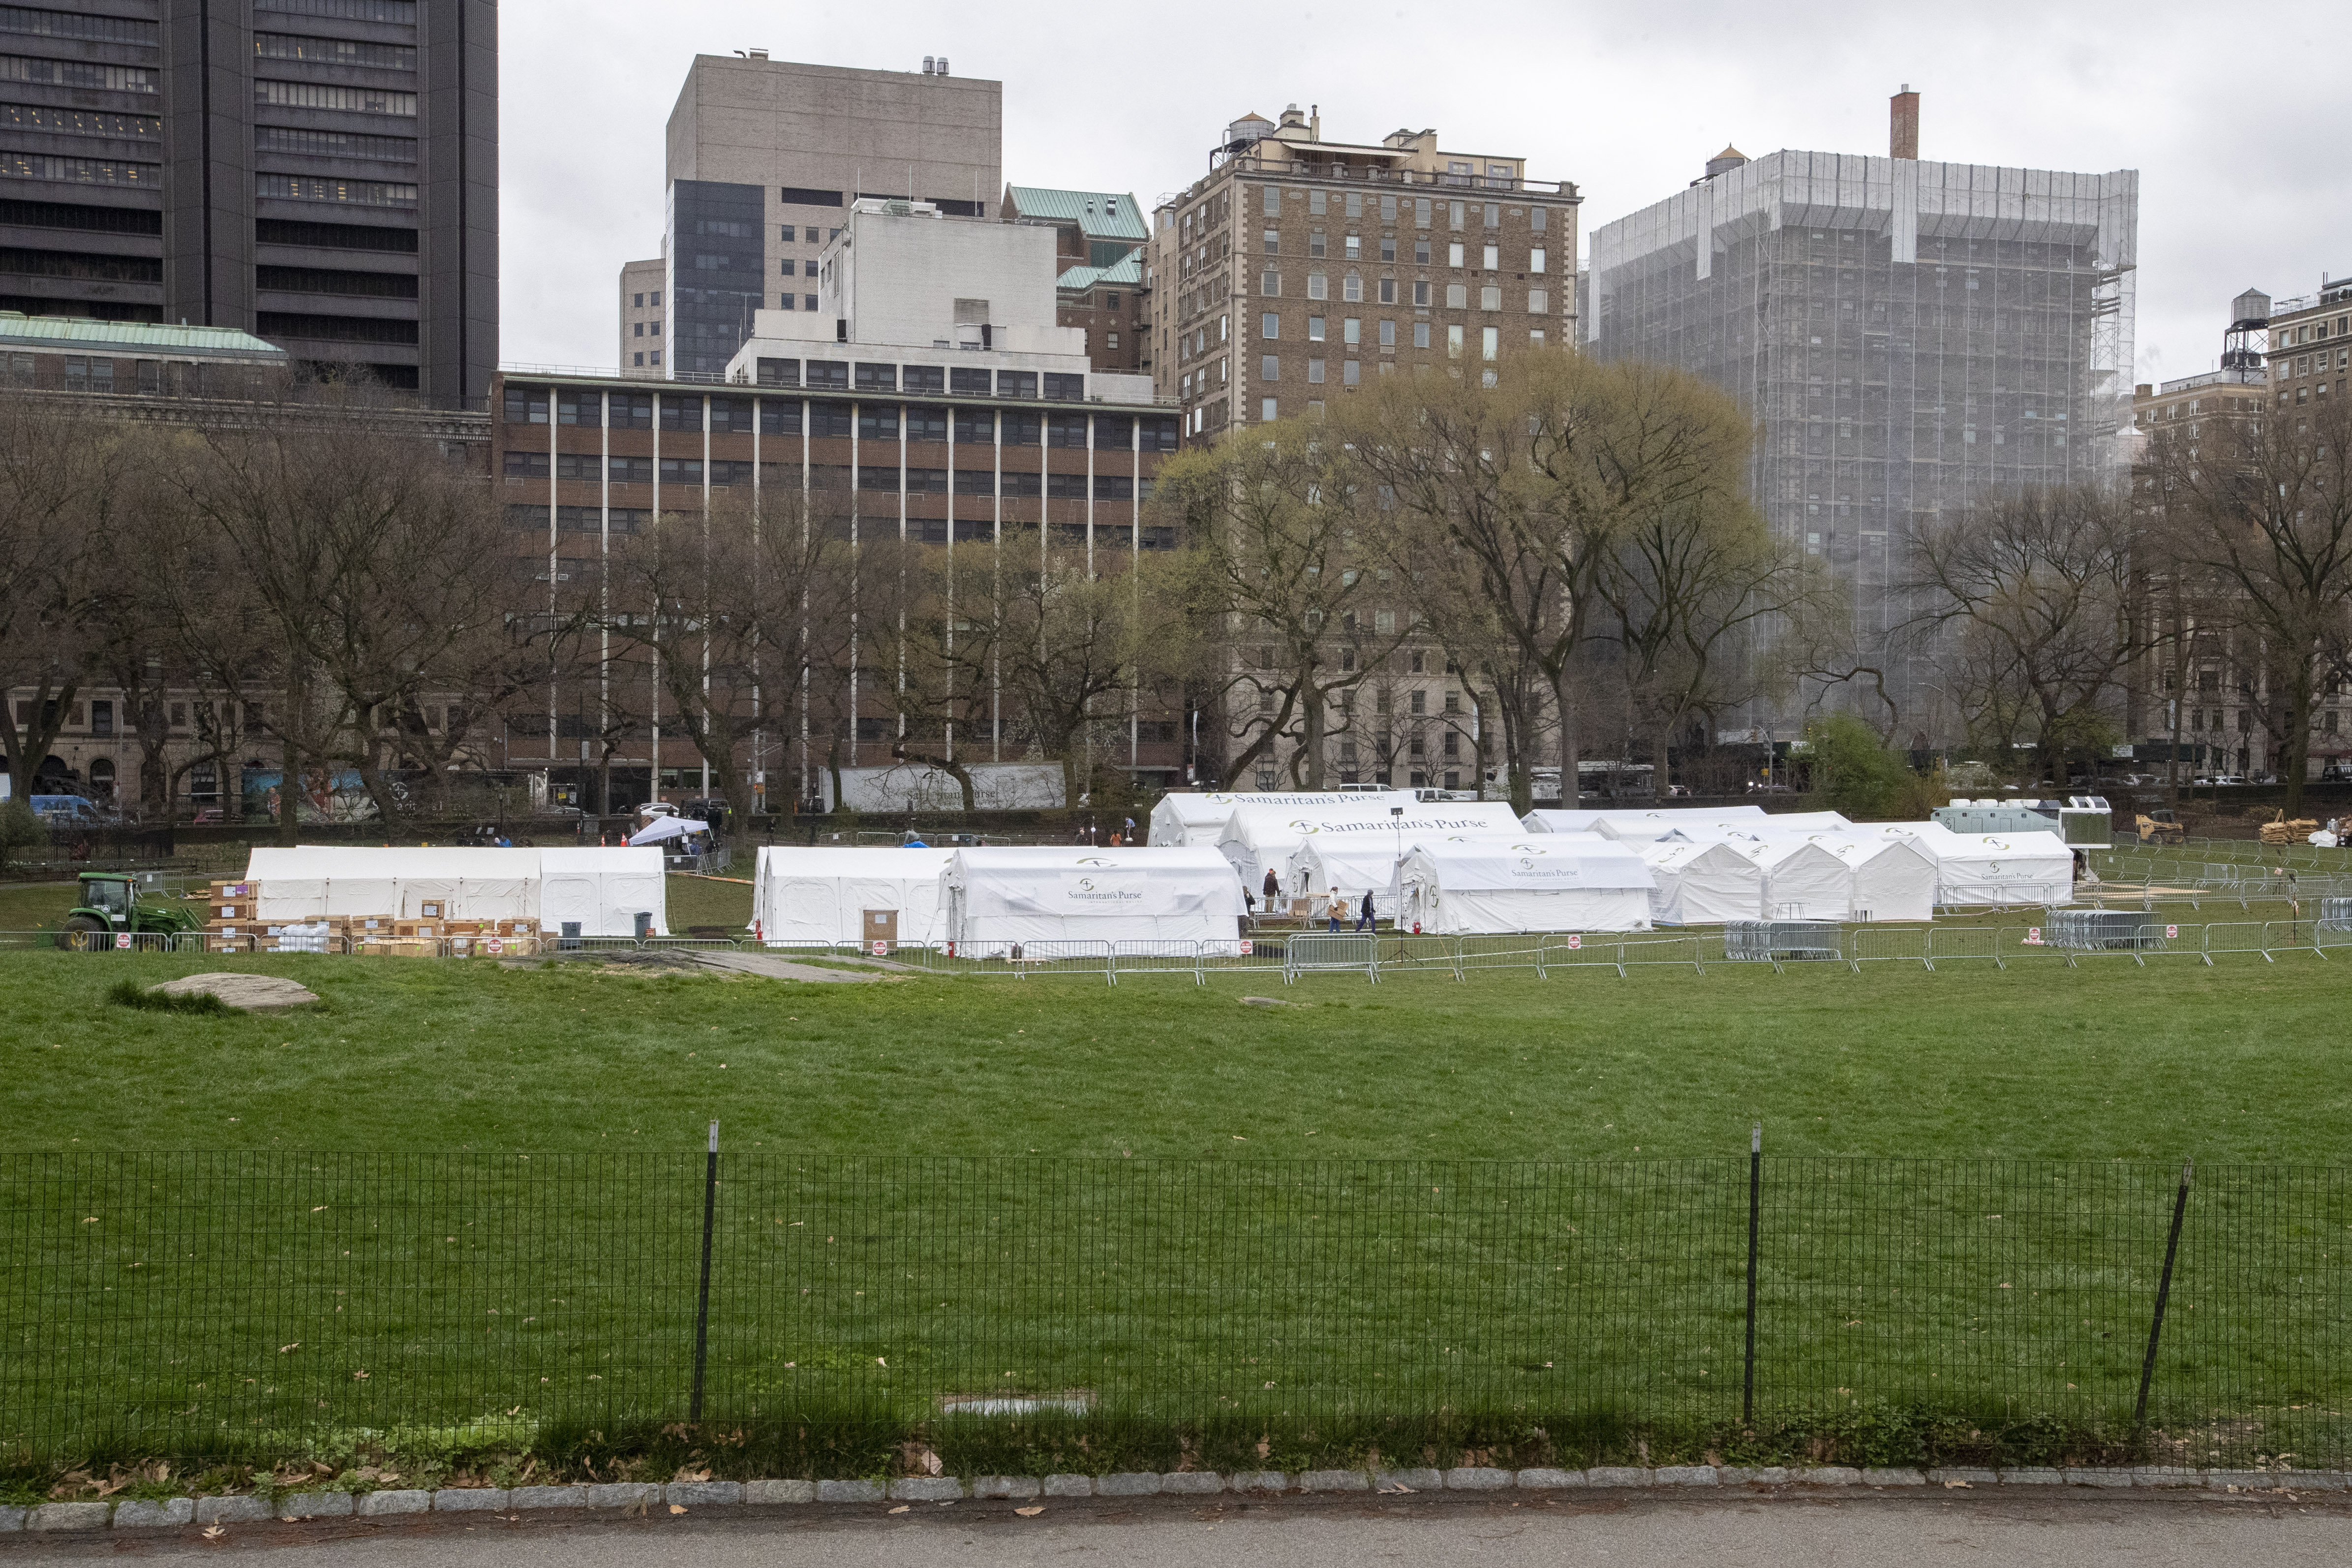 A Samaritan's Purse crew and medical personnel work on preparing an emergency field hospital in New York's Central Park on Tuesday, March 31.